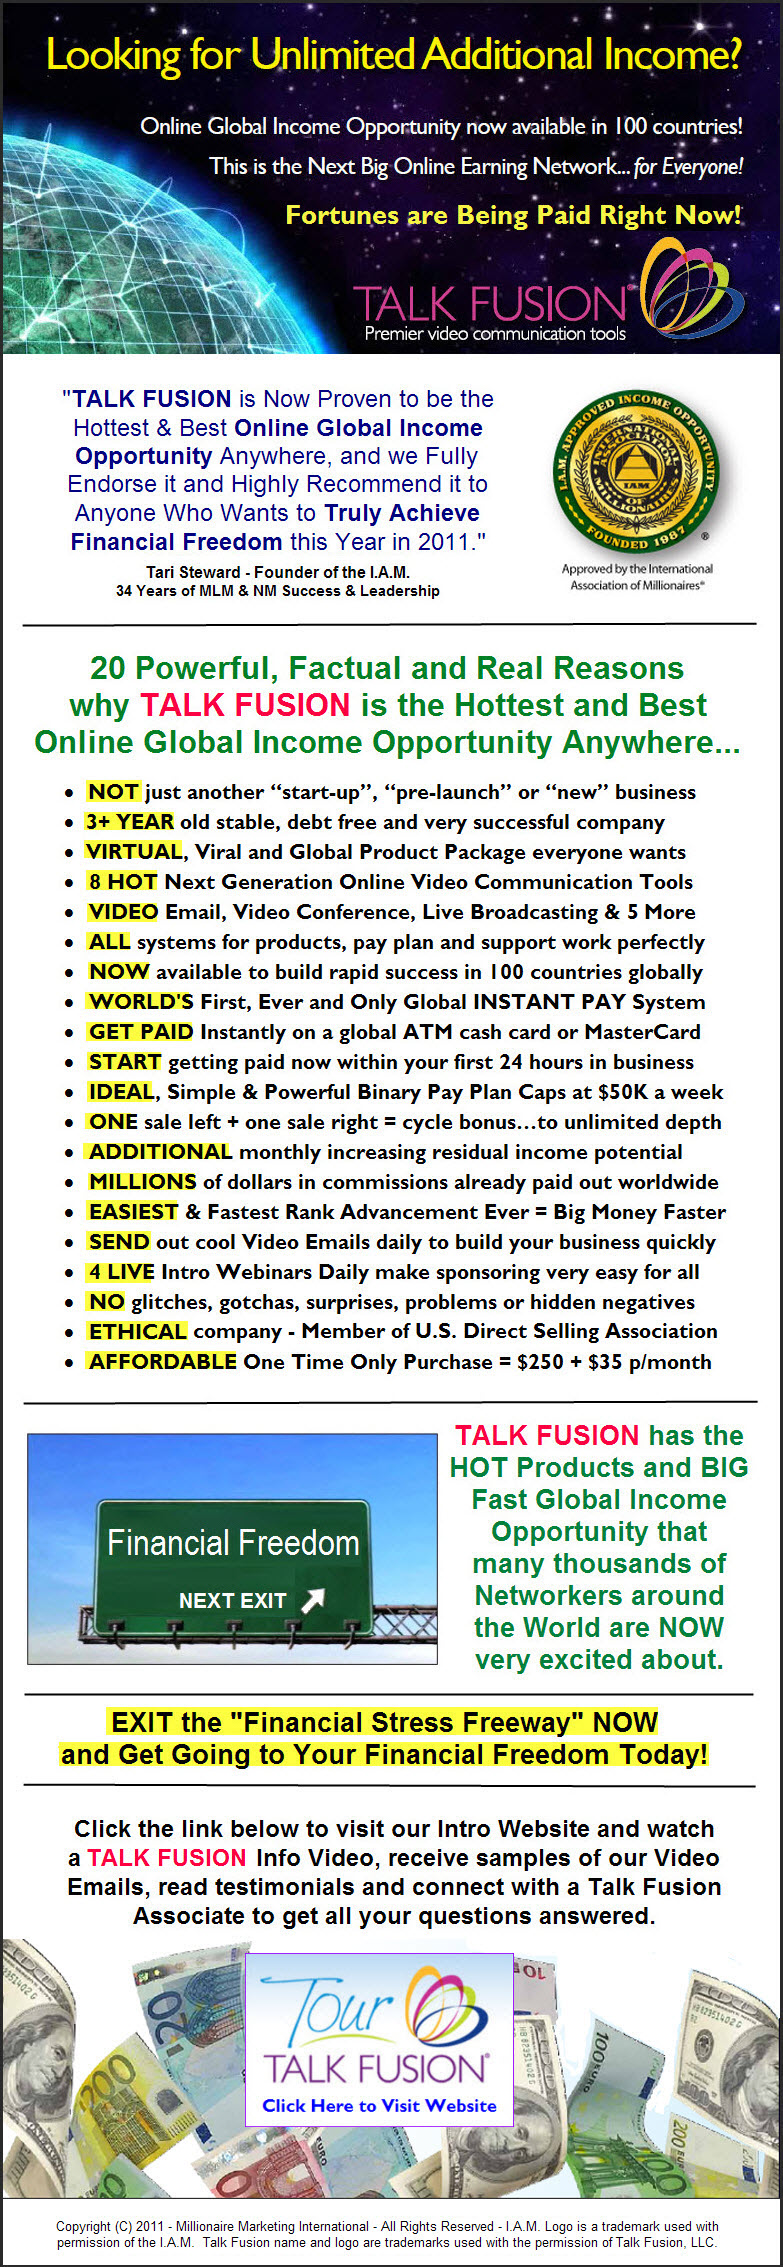 TalkFusion-Email-Image-1.jpg